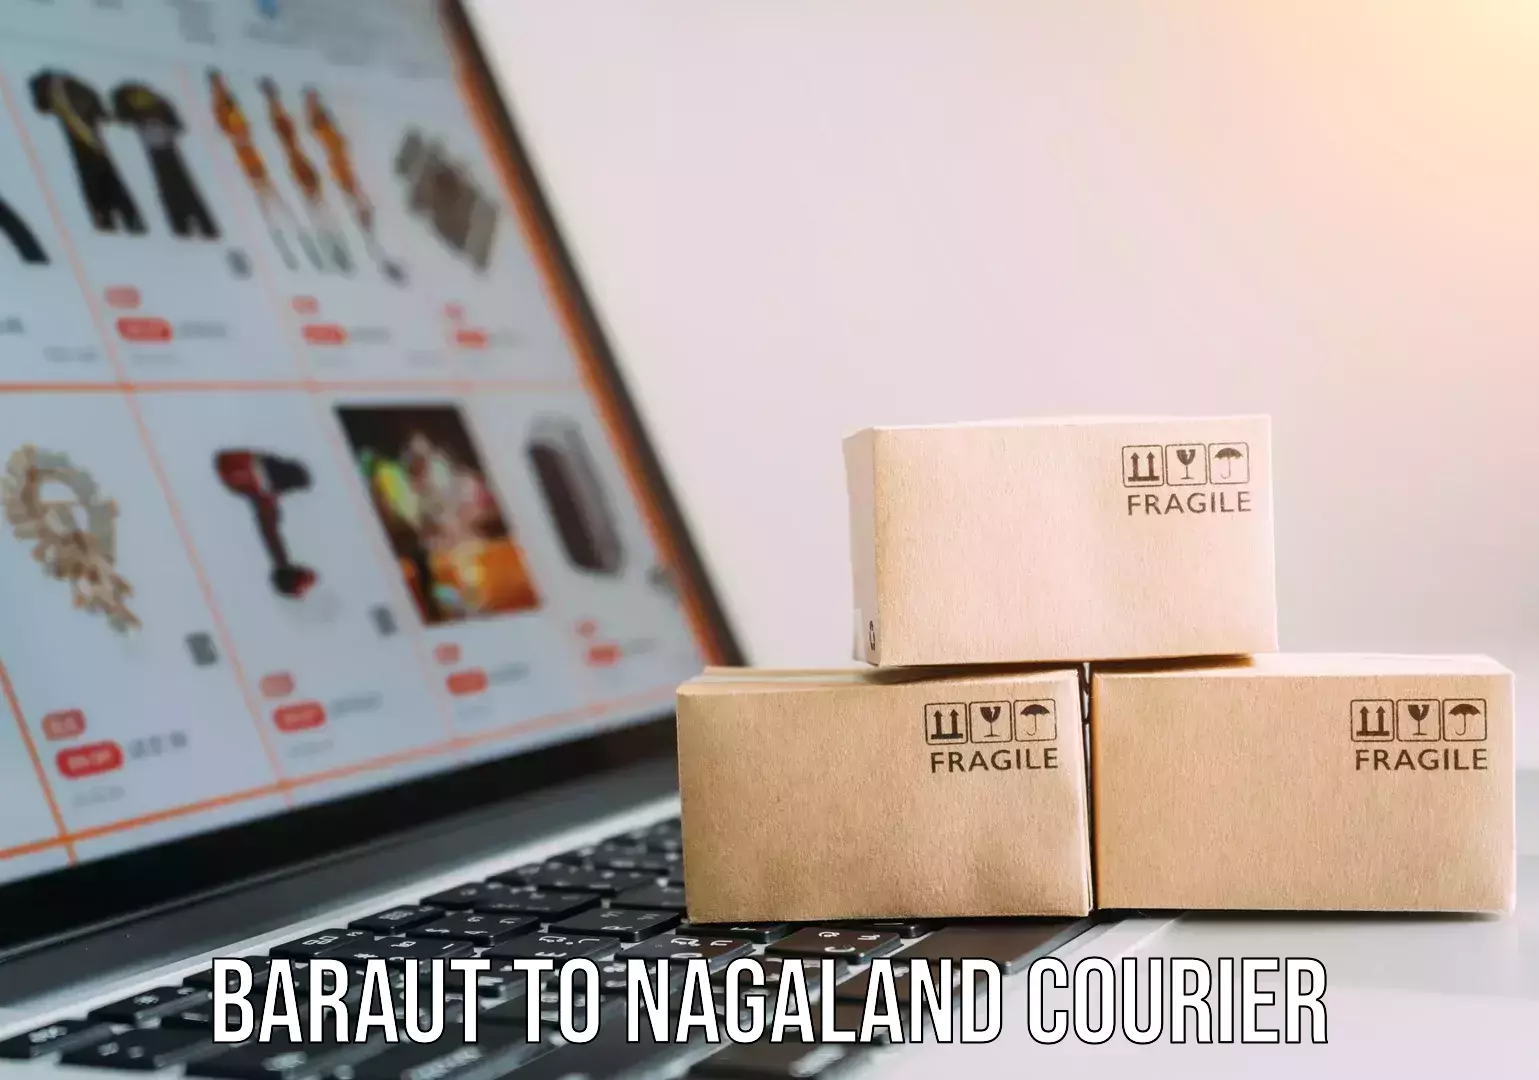 Subscription-based courier Baraut to Nagaland